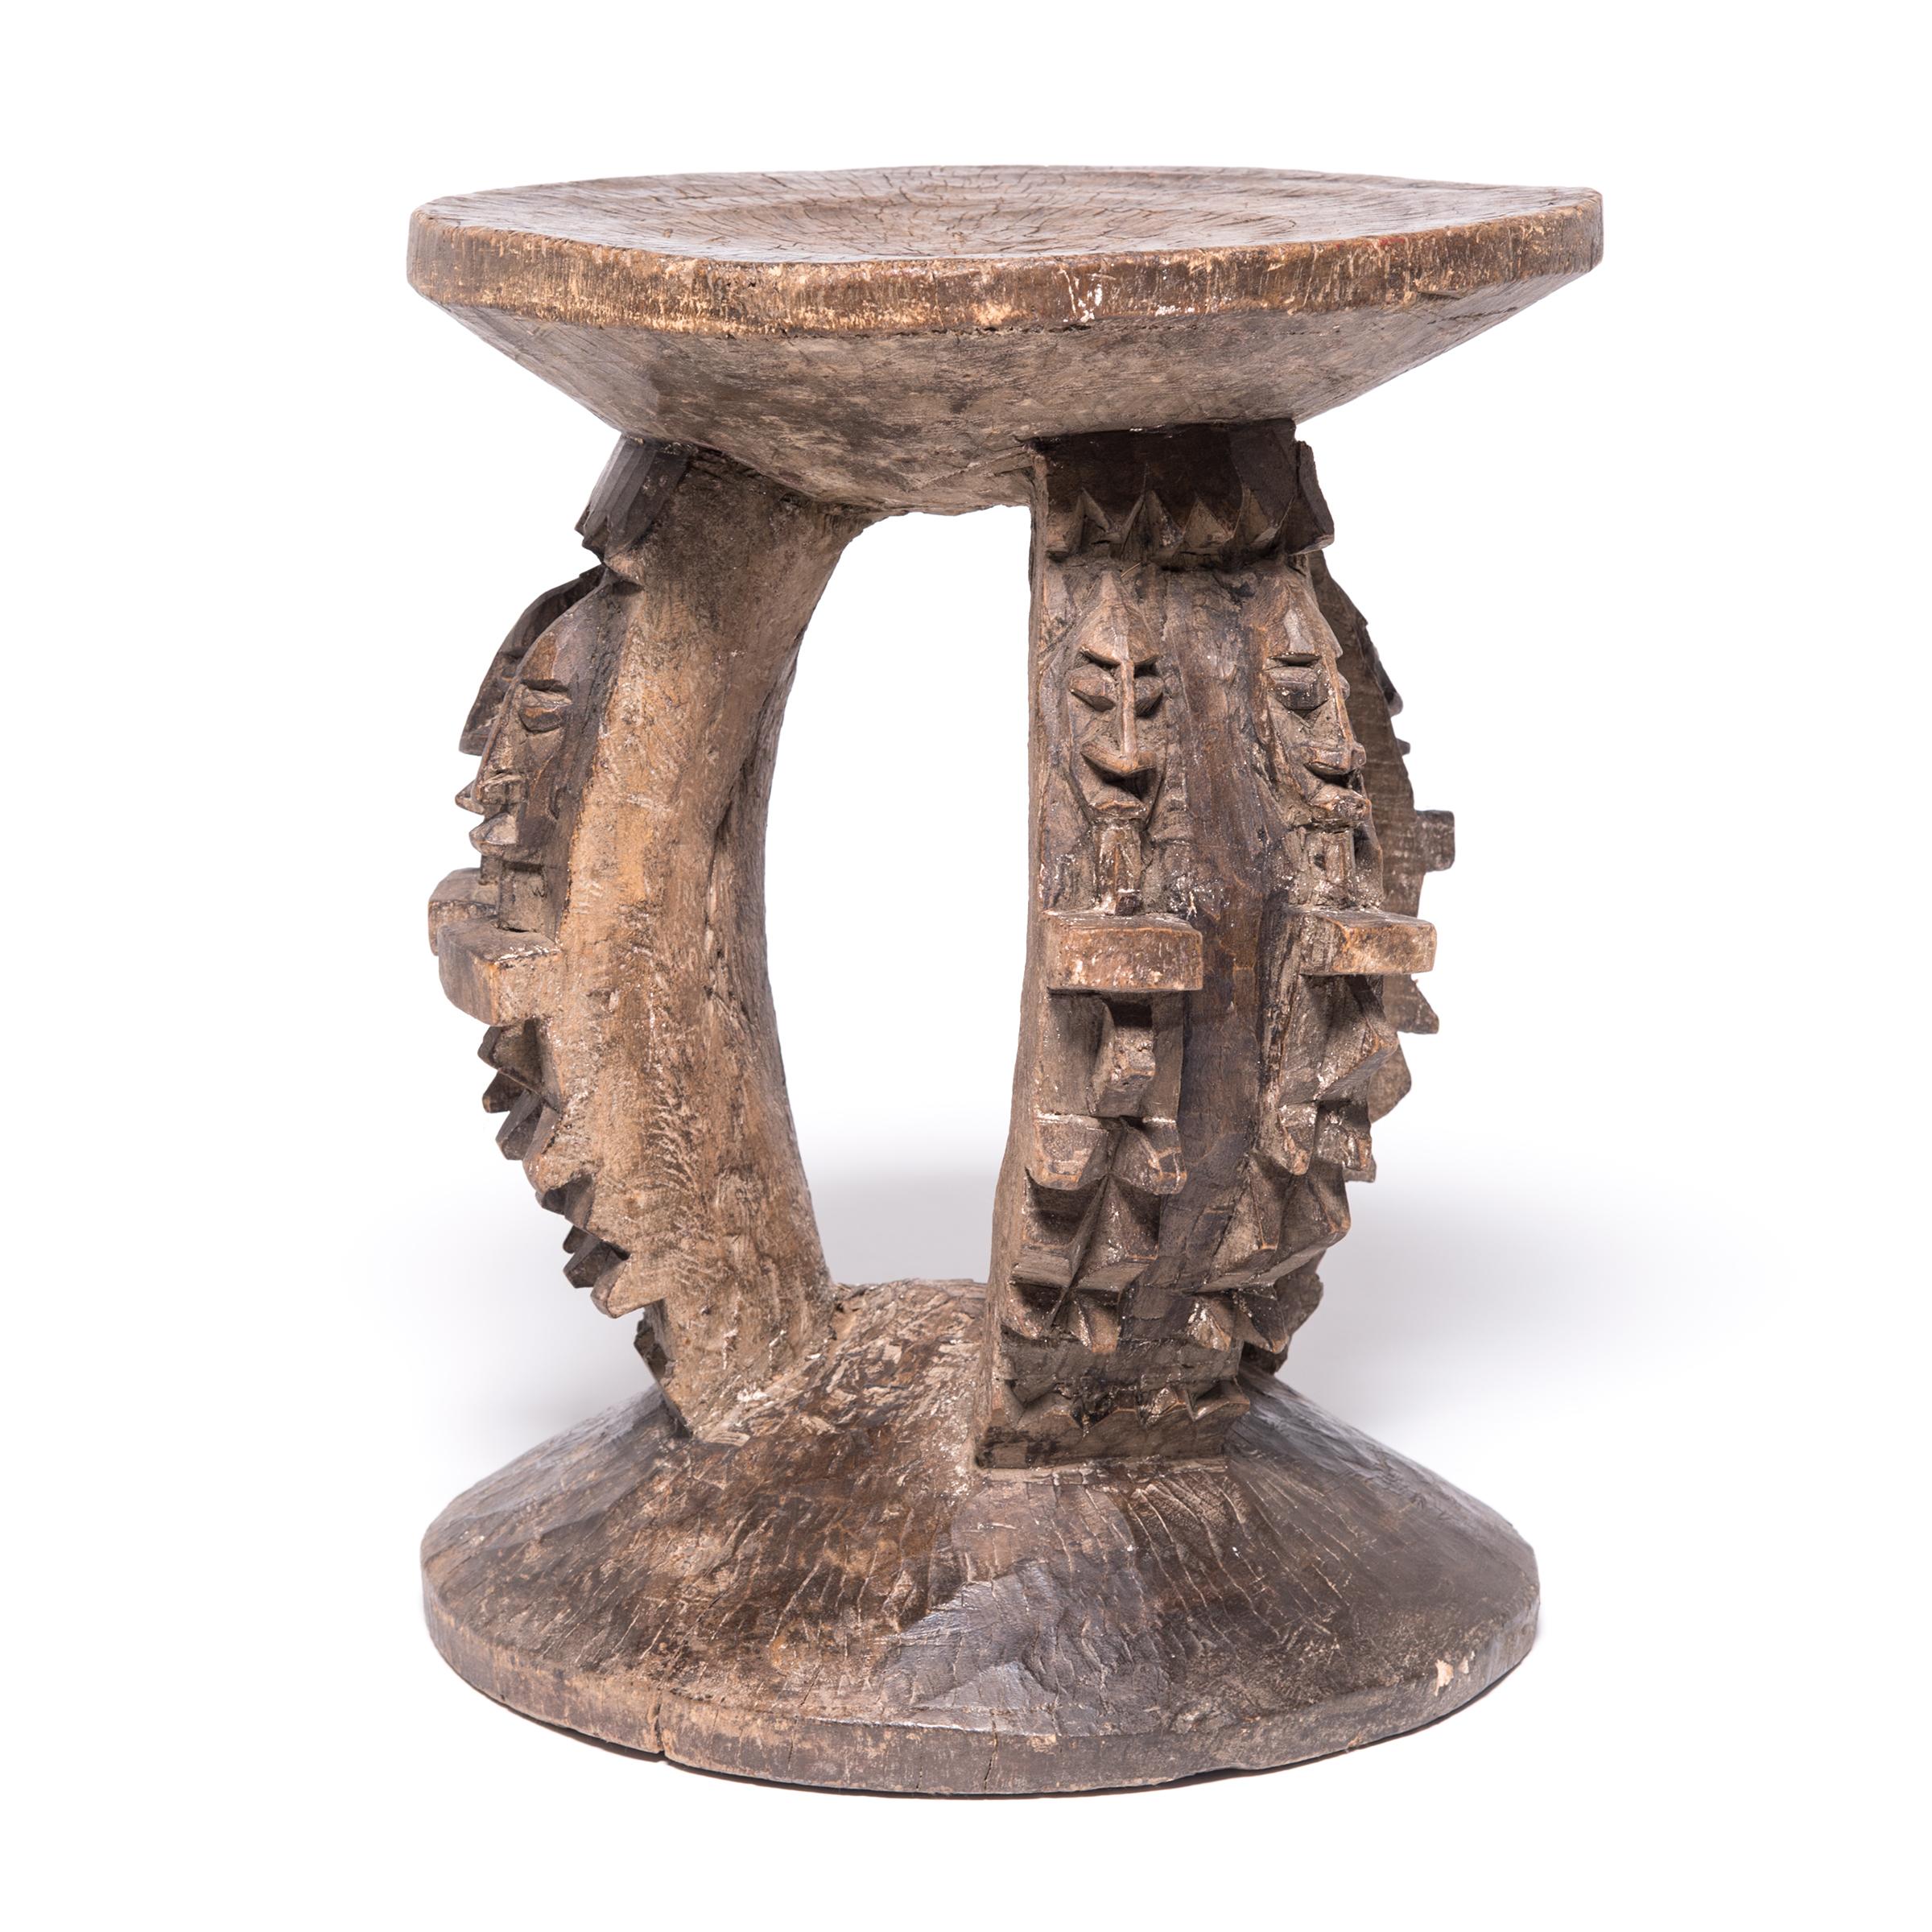 Created by the Dogon people of central Mali, this expressively carved stool continues a tradition of using stools as symbols of authority. Owning a finely made stool represented one's earned right to sit above, as befit a person of rank. Figures